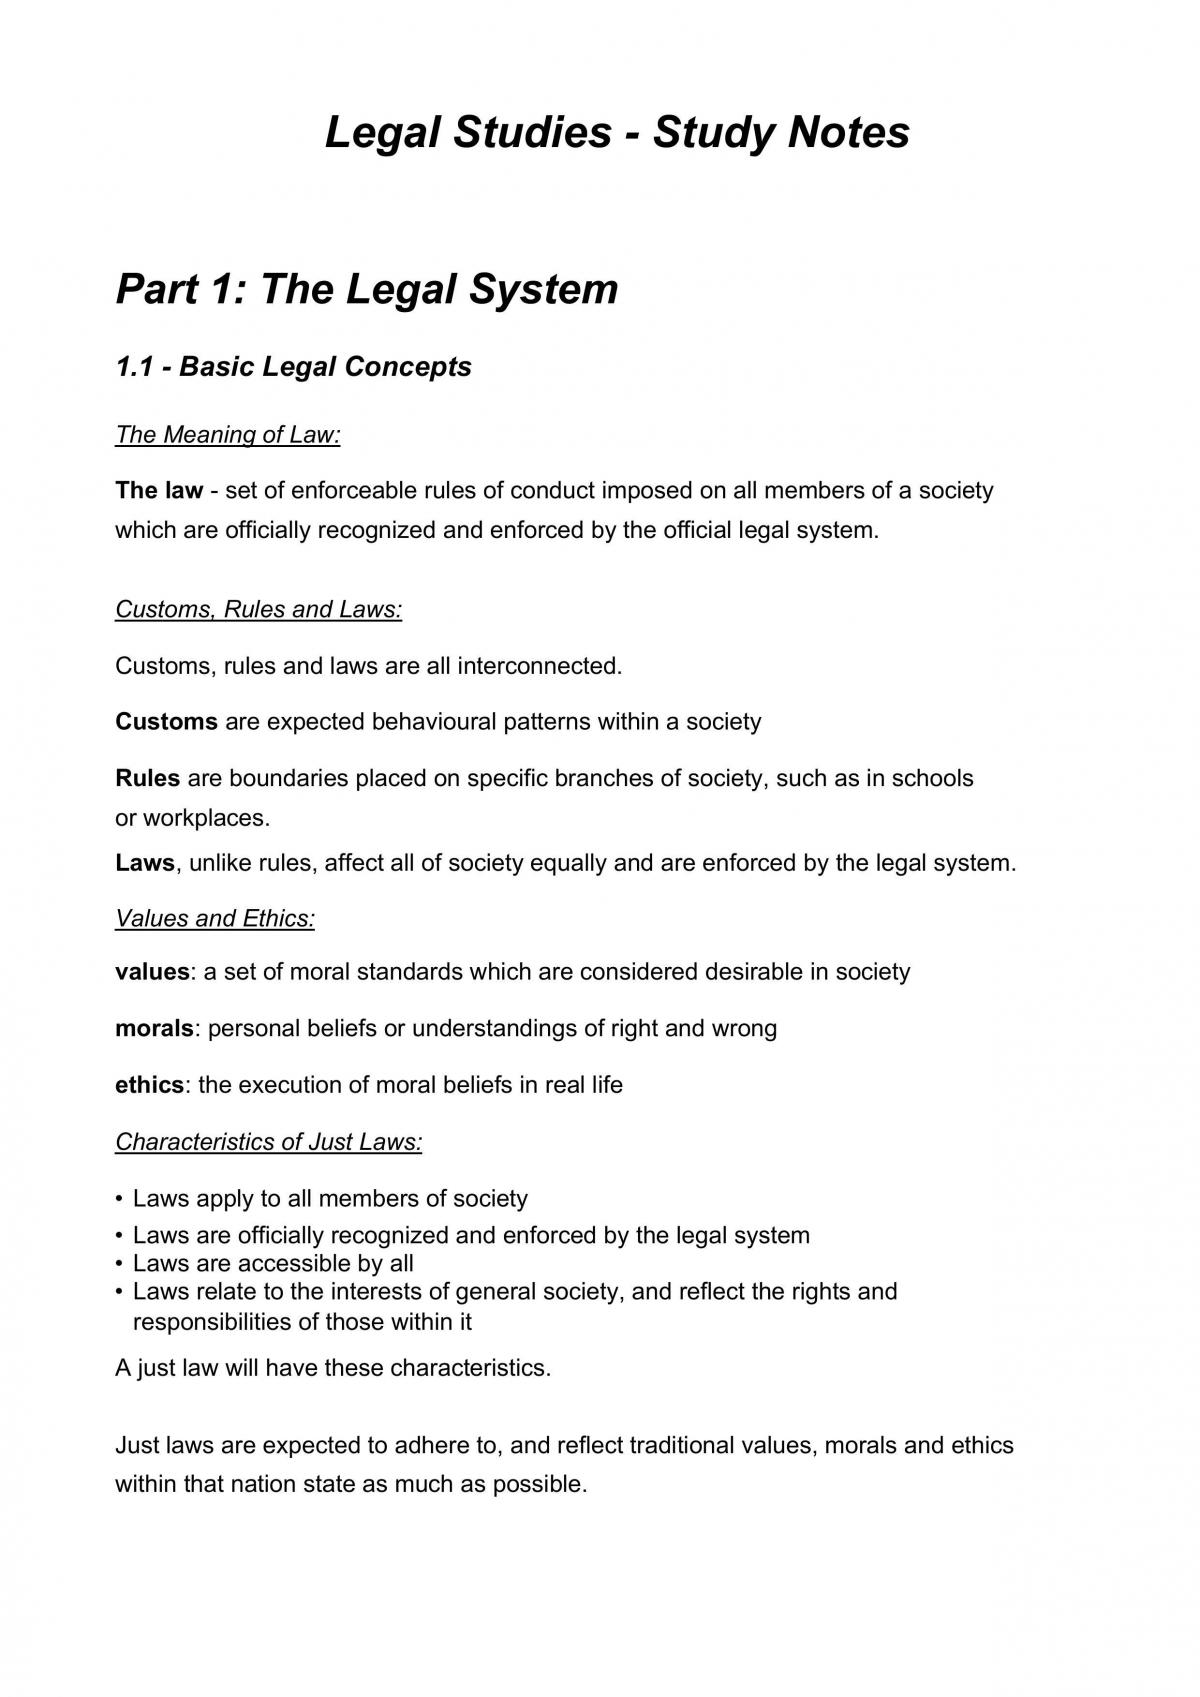 how to write legal studies essay